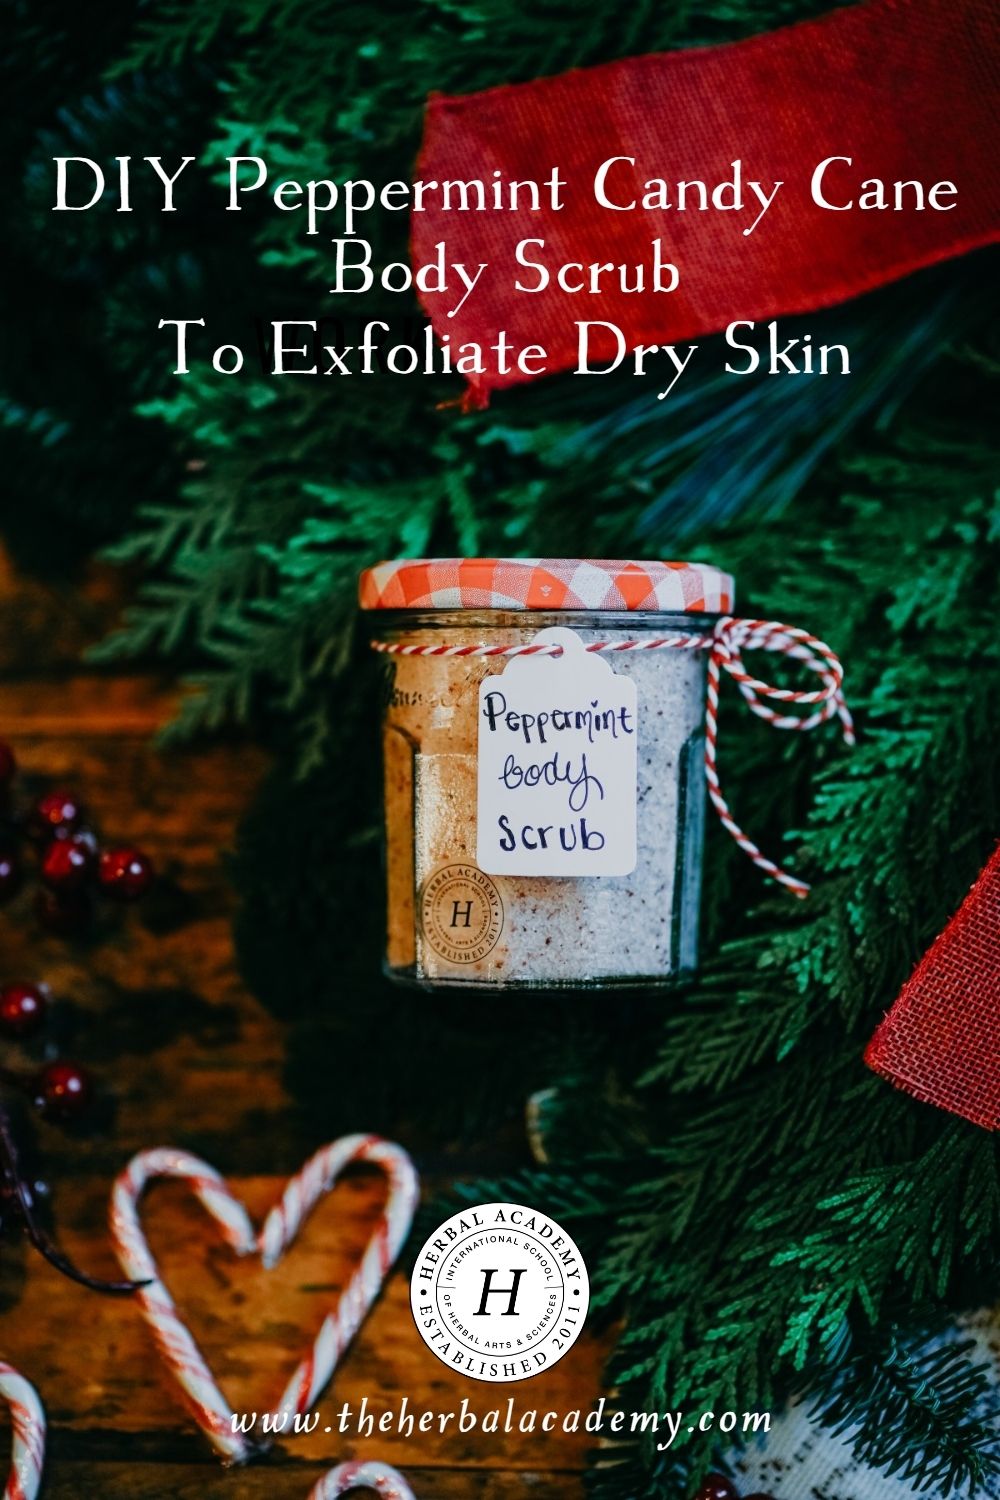 This DIY Peppermint Candy Cane Body Scrub Will Exfoliate Dry Skin and Leave You Feeling Refreshed and Renewed | Herbal Academy | This DIY Peppermint Candy Cane Body Scrub will exfoliate your skin and leave you feeling refreshed and rejuvenated.